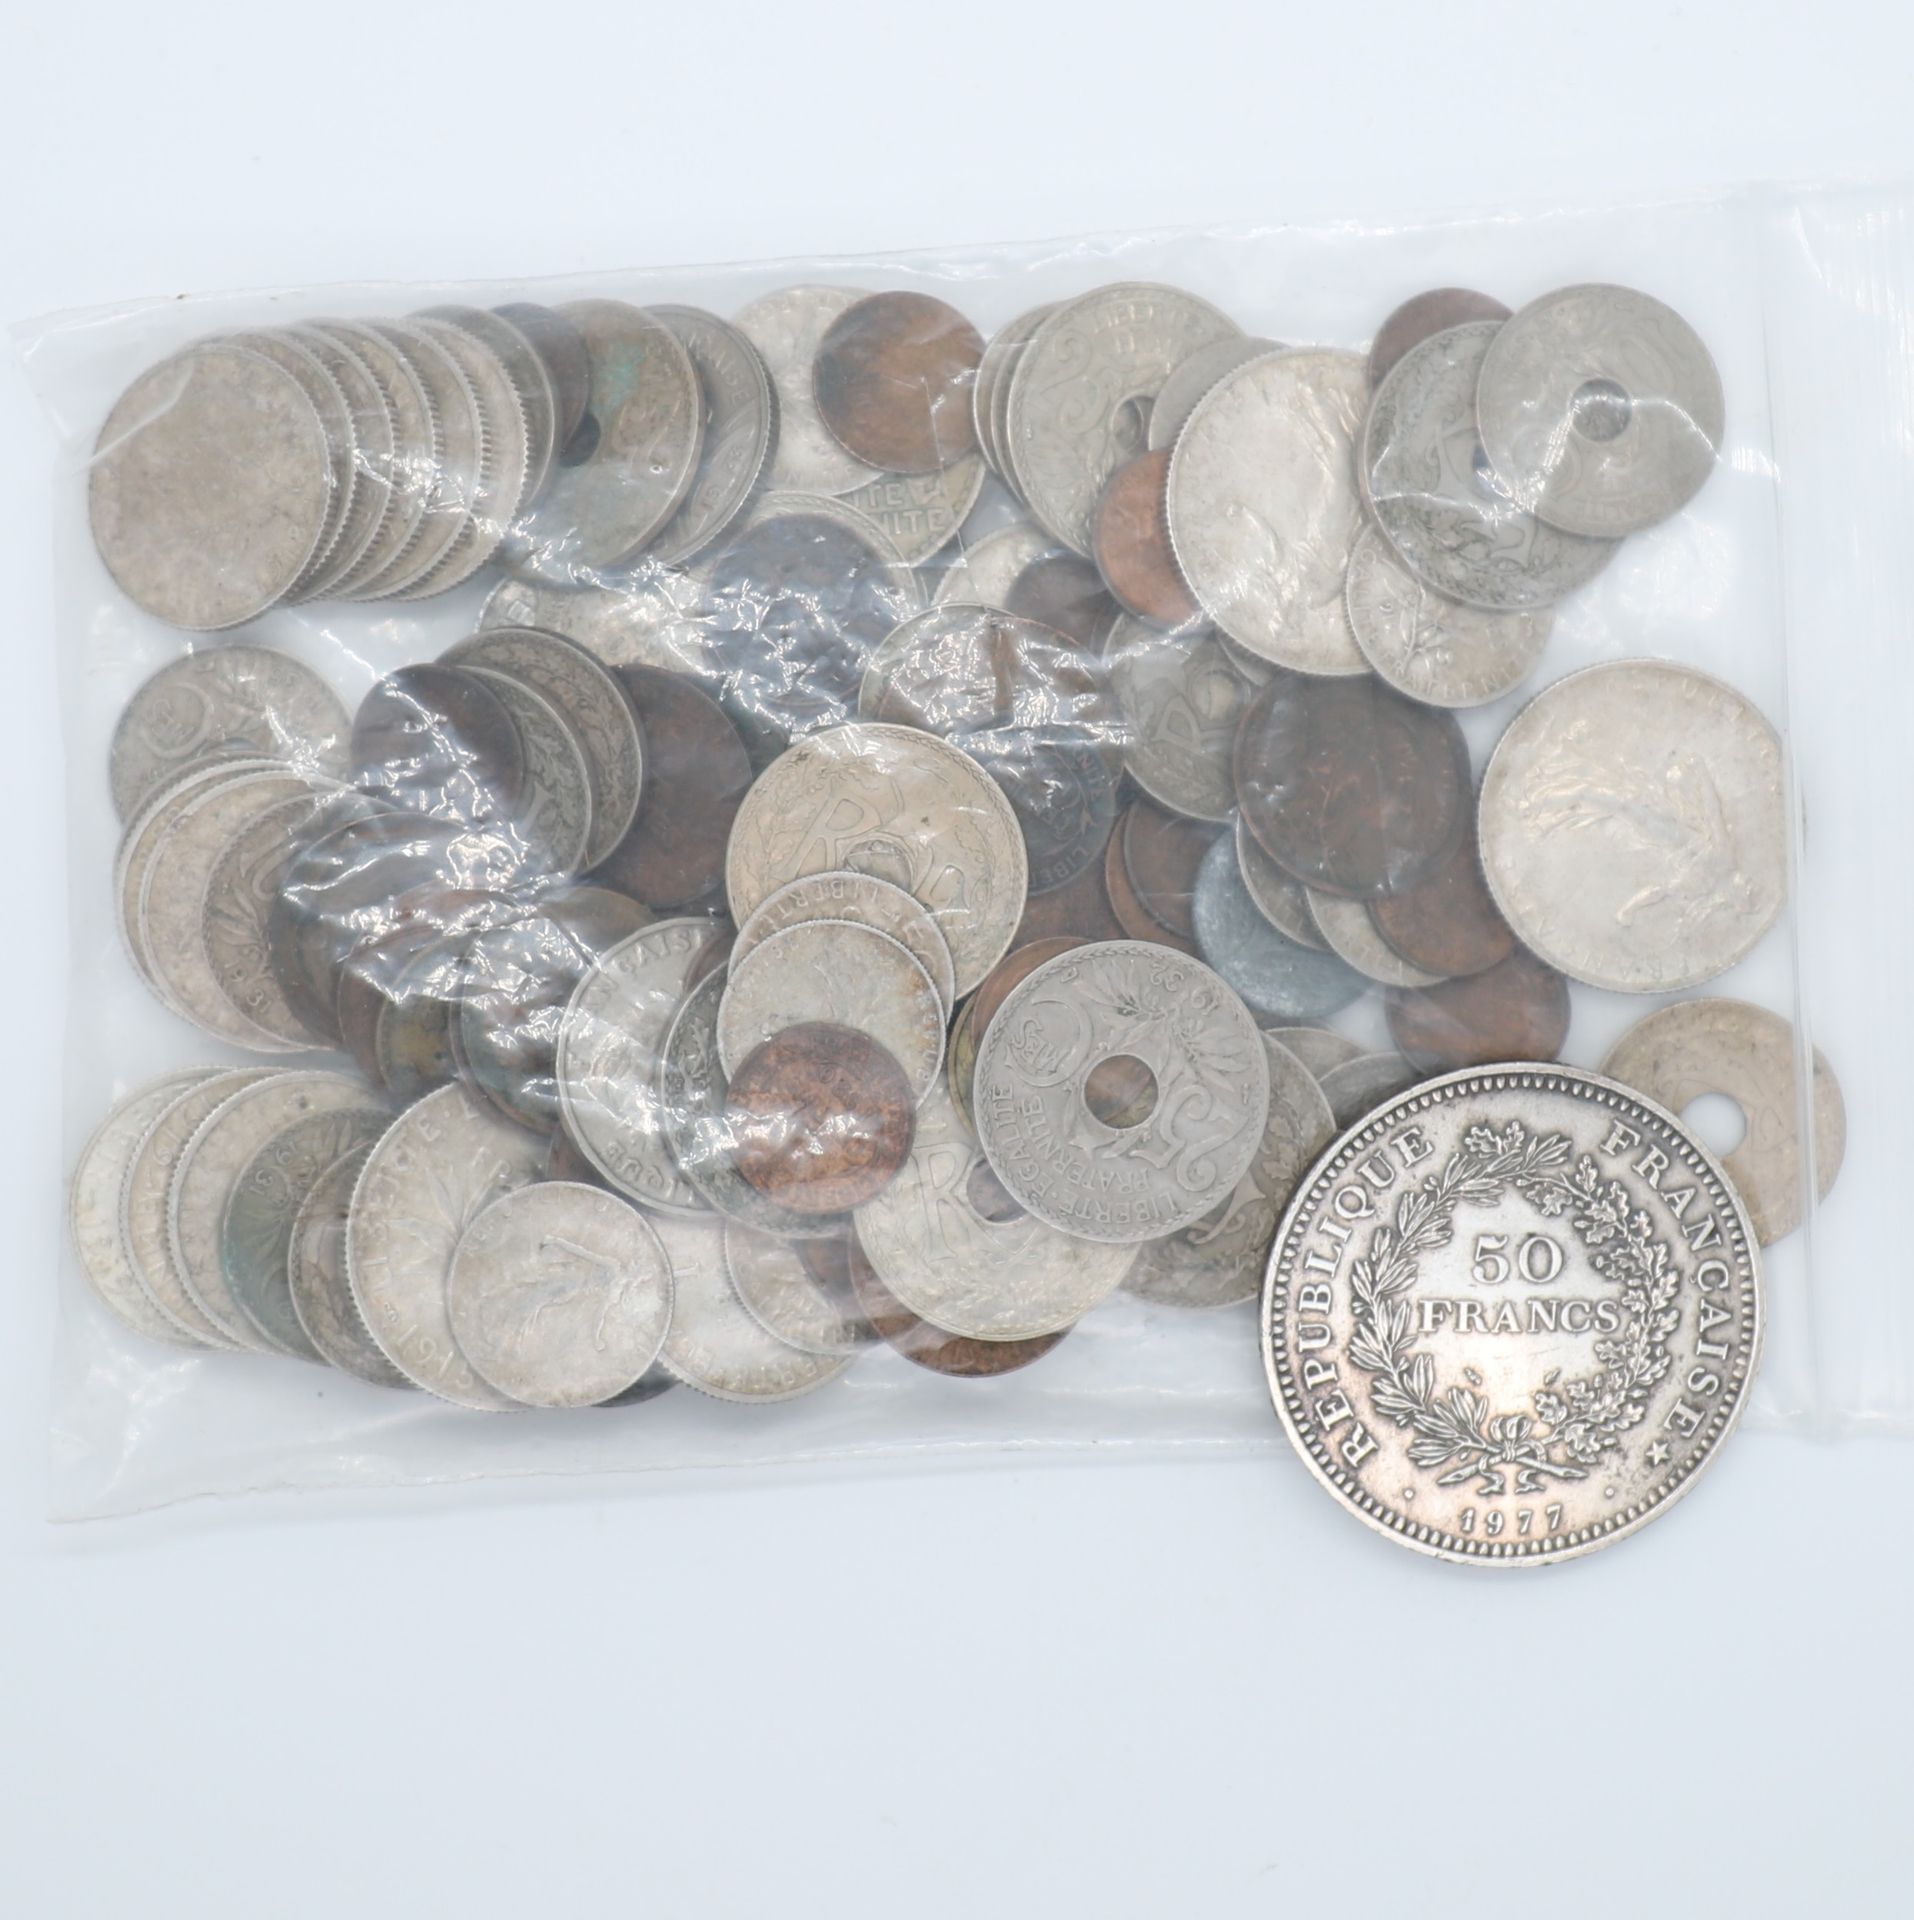 Null NICE LOT OF ABOUT A HUNDRED FRENCH FRANC COINS
Including a 50 Francs Hercul&hellip;